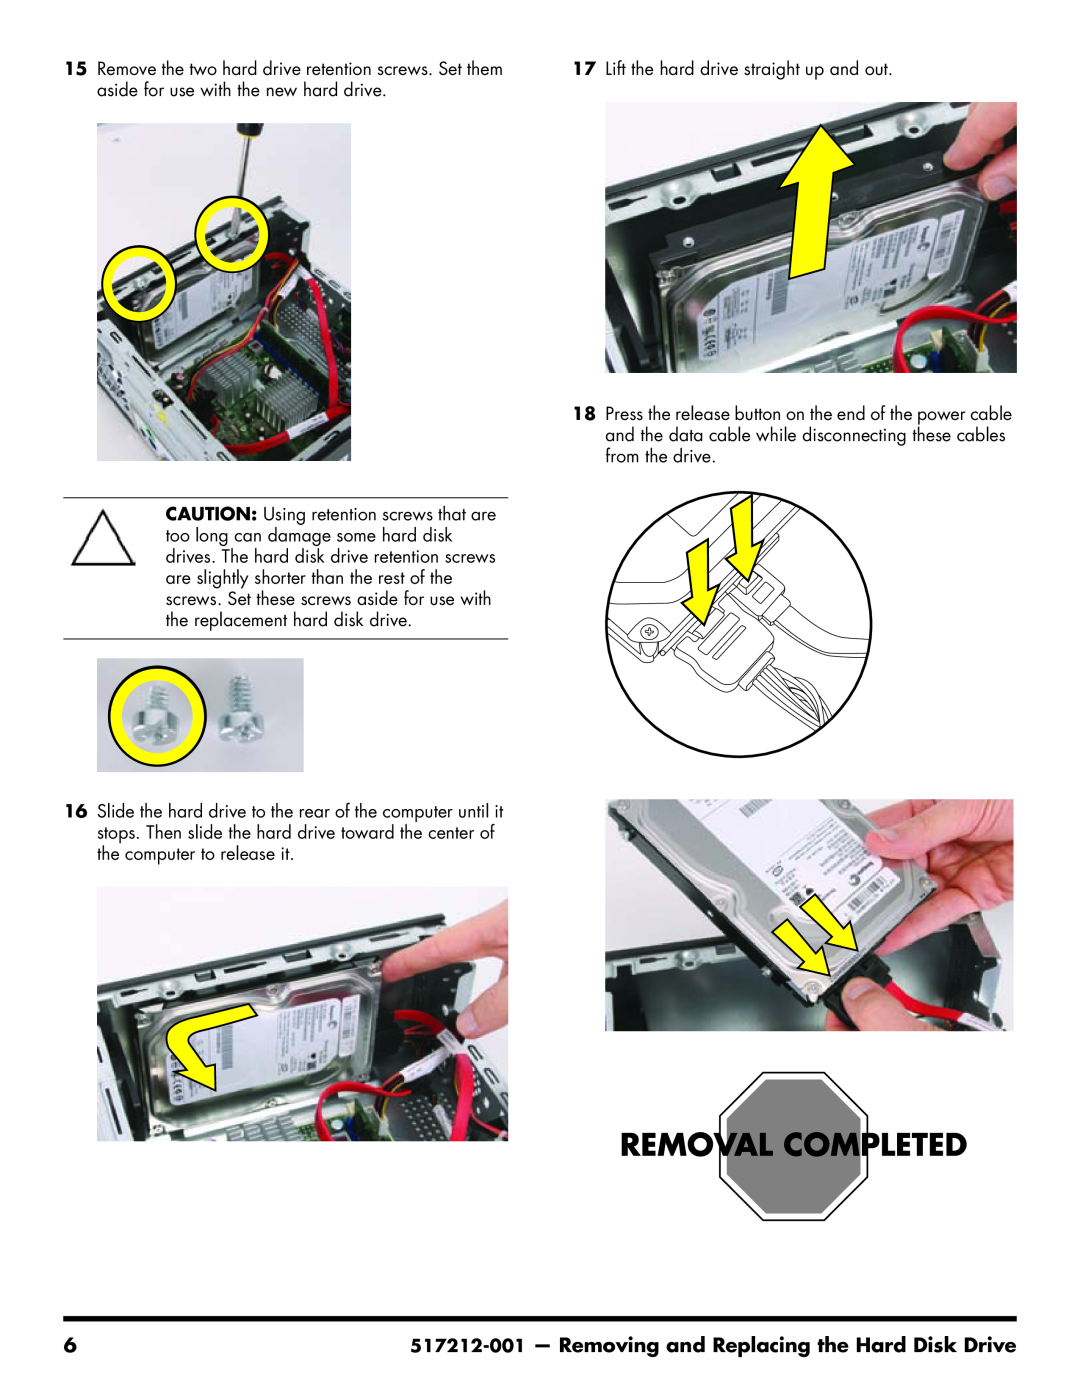 Compaq 517212-001 manual Removing and Replacing the Hard Disk Drive, Lift the hard drive straight up and out 